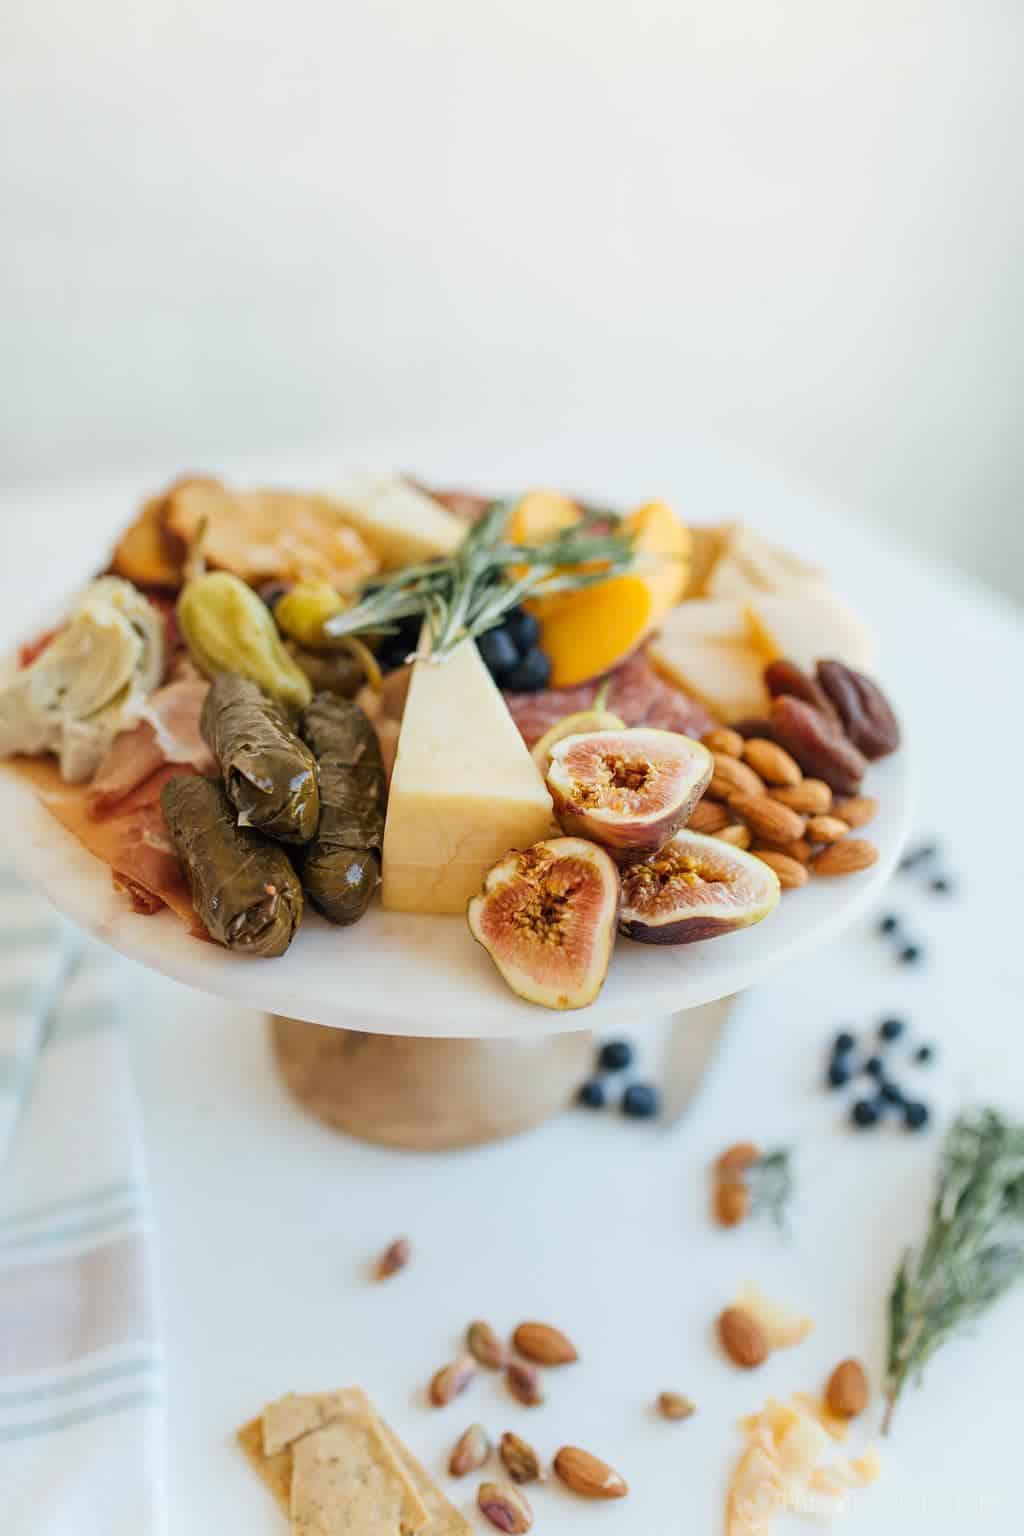 Charcuterie Board with meats, cheeses and more